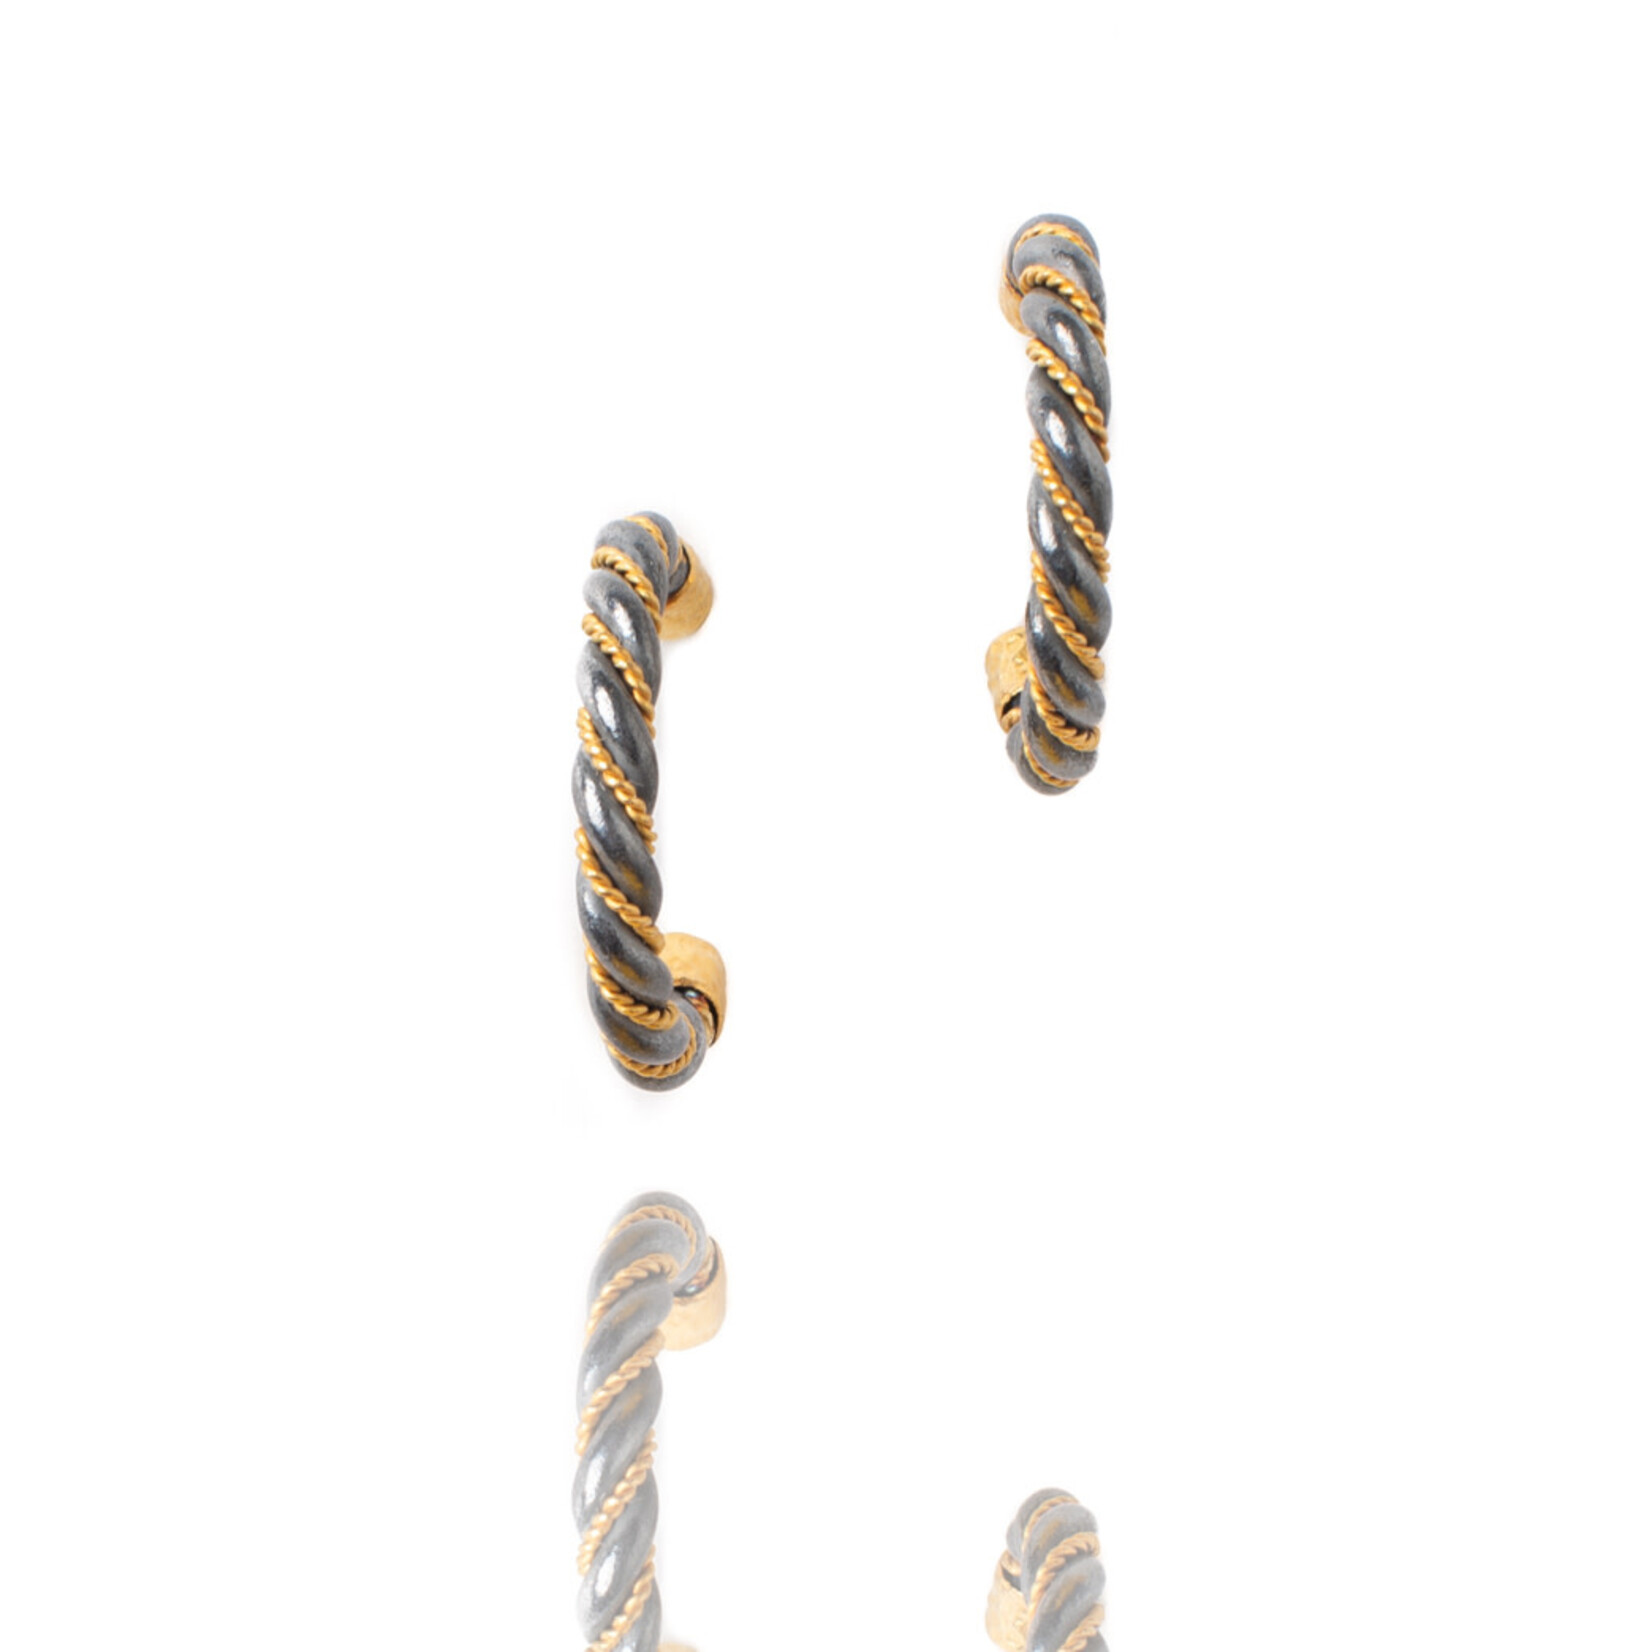 ARA Collection 24k Gold and Oxidized Sterling Silver Twist Hoop